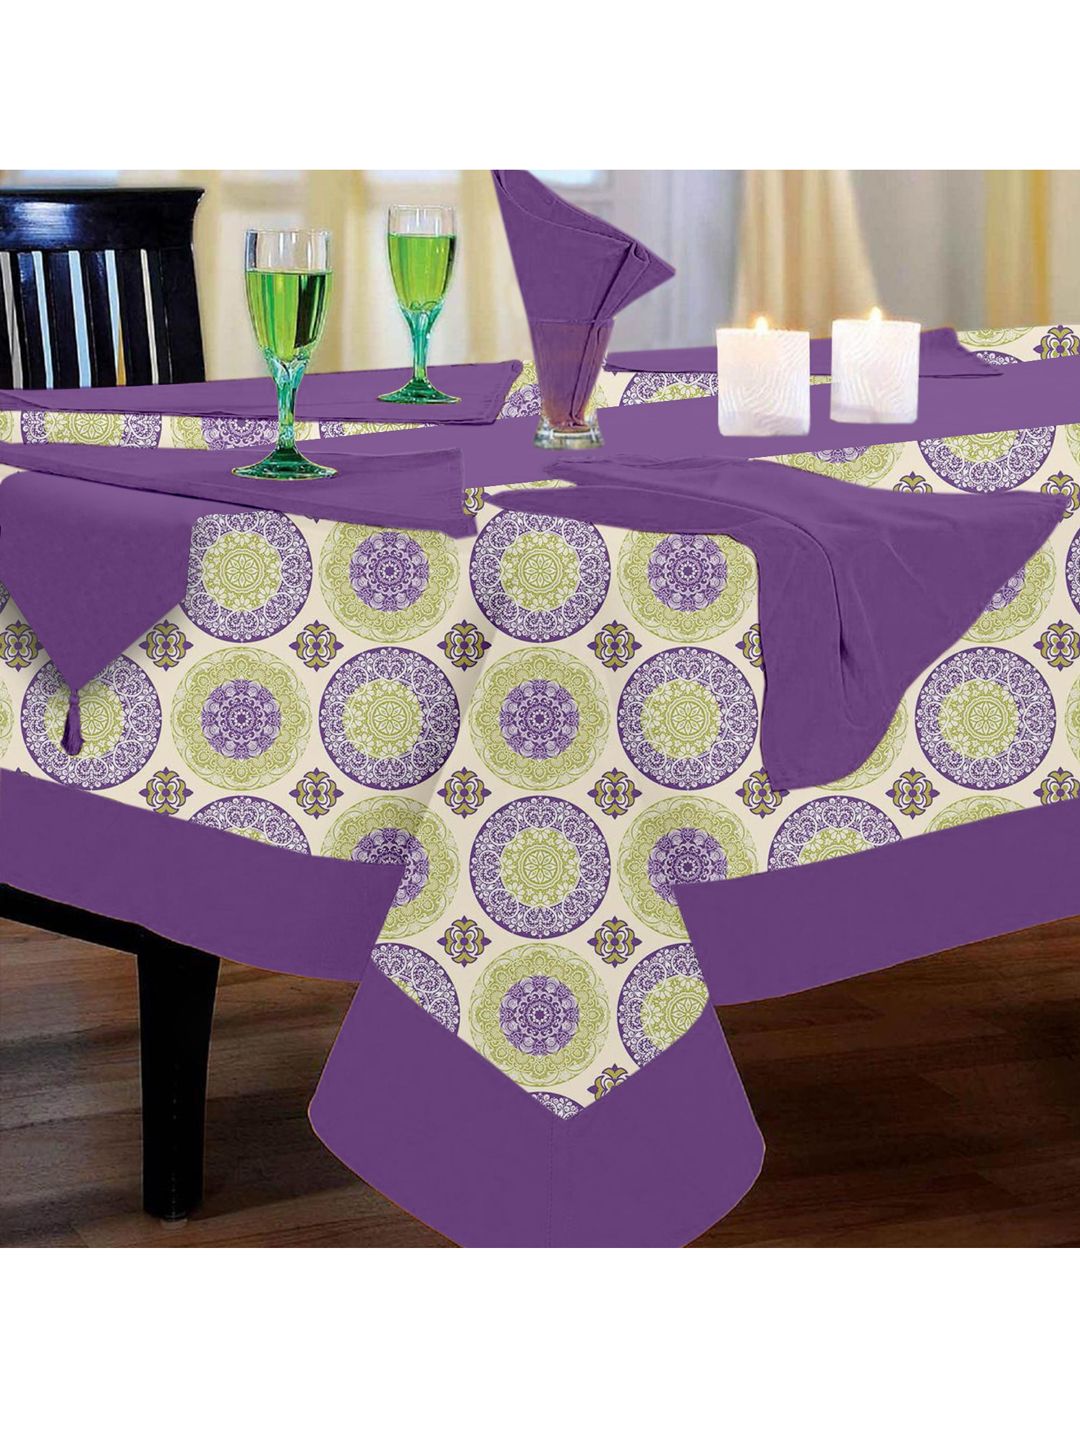 Lushomes Multi Colour Printed 6 Seater Table Linen Set 1 Table Cloth,1 Runner&6 Napkins Price in India